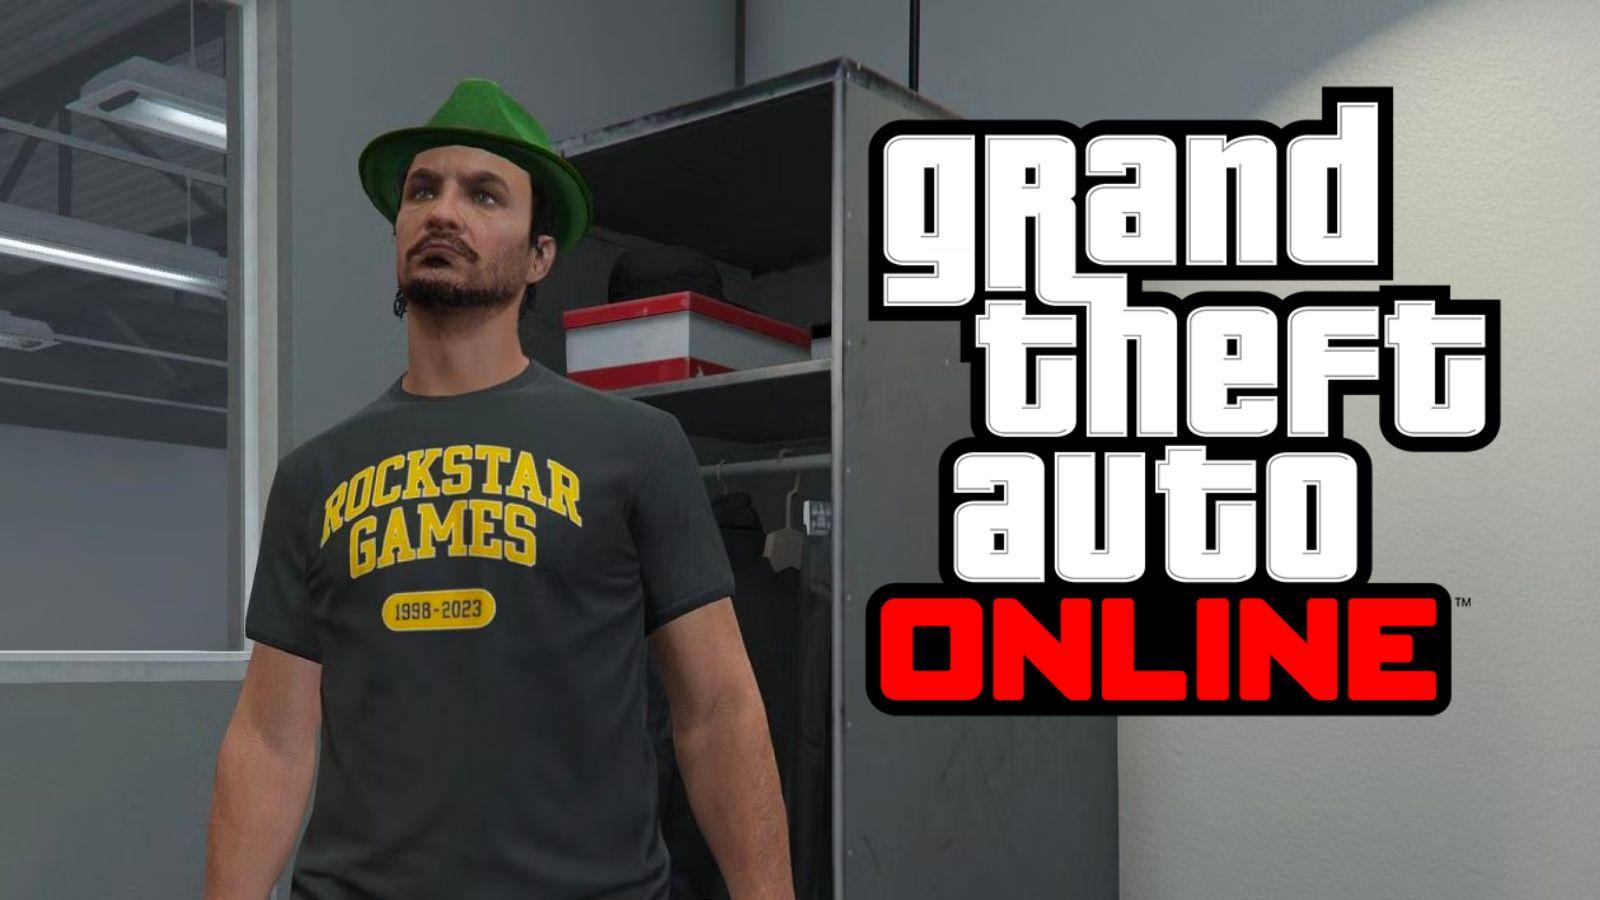 GTA Online character in black and yellow shirt next to GTA Online logo